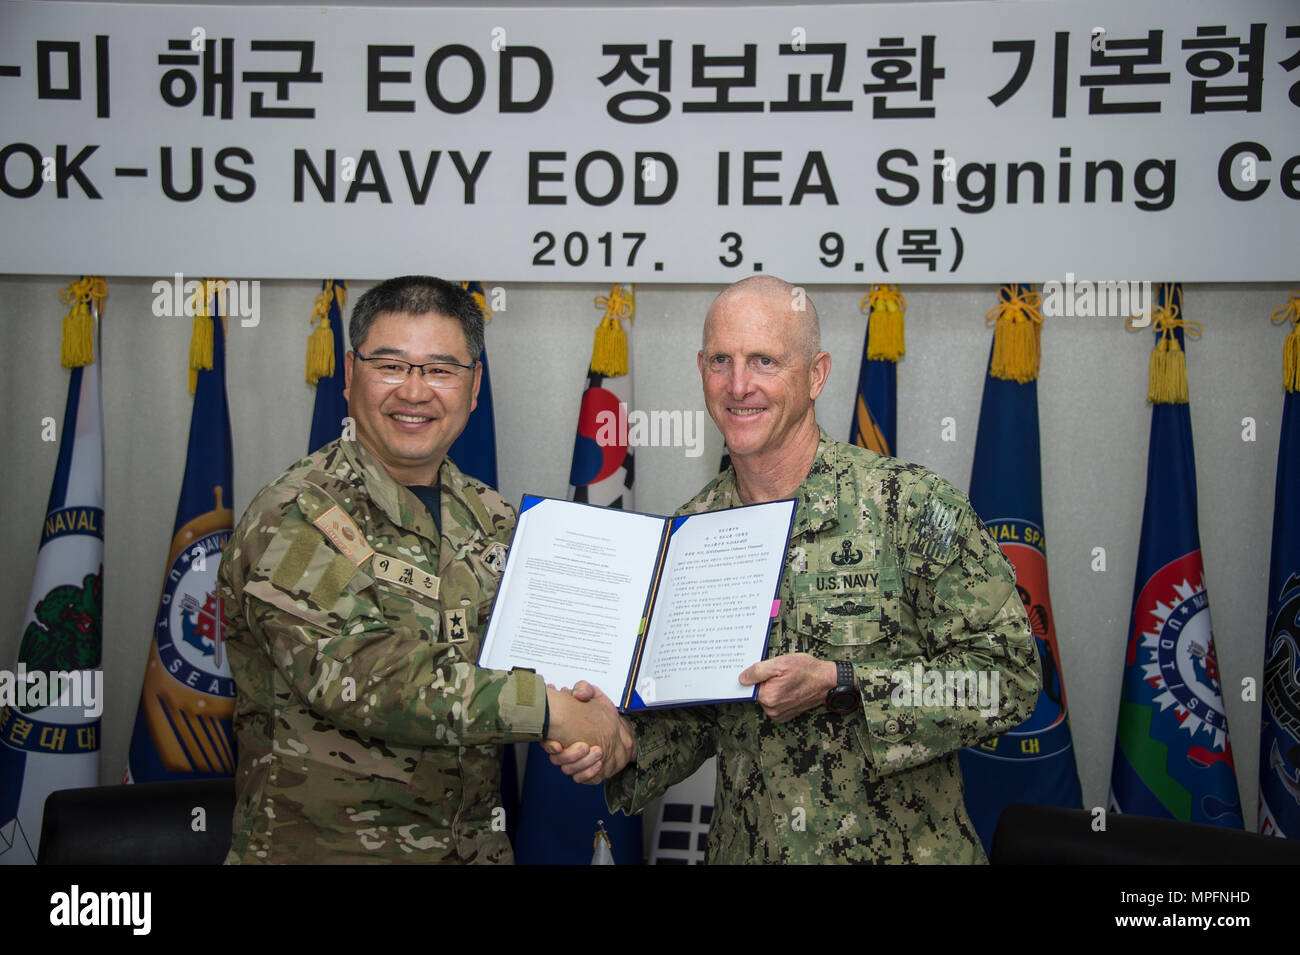 Commander, Republic of Korea (ROK) Naval Special Warfare Flotilla, Rear Adm. Jae Eun Lee, and Commander, Task Force 75, U.S. Navy Capt. Robert A. Baughman, shake hands after signing an information exchange agreement in Jinhae, ROK, March 9, 2017, as part of exercise Foal Eagle 2017. The agreement addresses research and development practices between the two nations, promotes explosive ordnance disposal interoperability, and enhances future readiness. (U.S. Navy Combat Camera photo by Mass Communication Specialist 3rd Class Alfred A. Coffield) Stock Photo